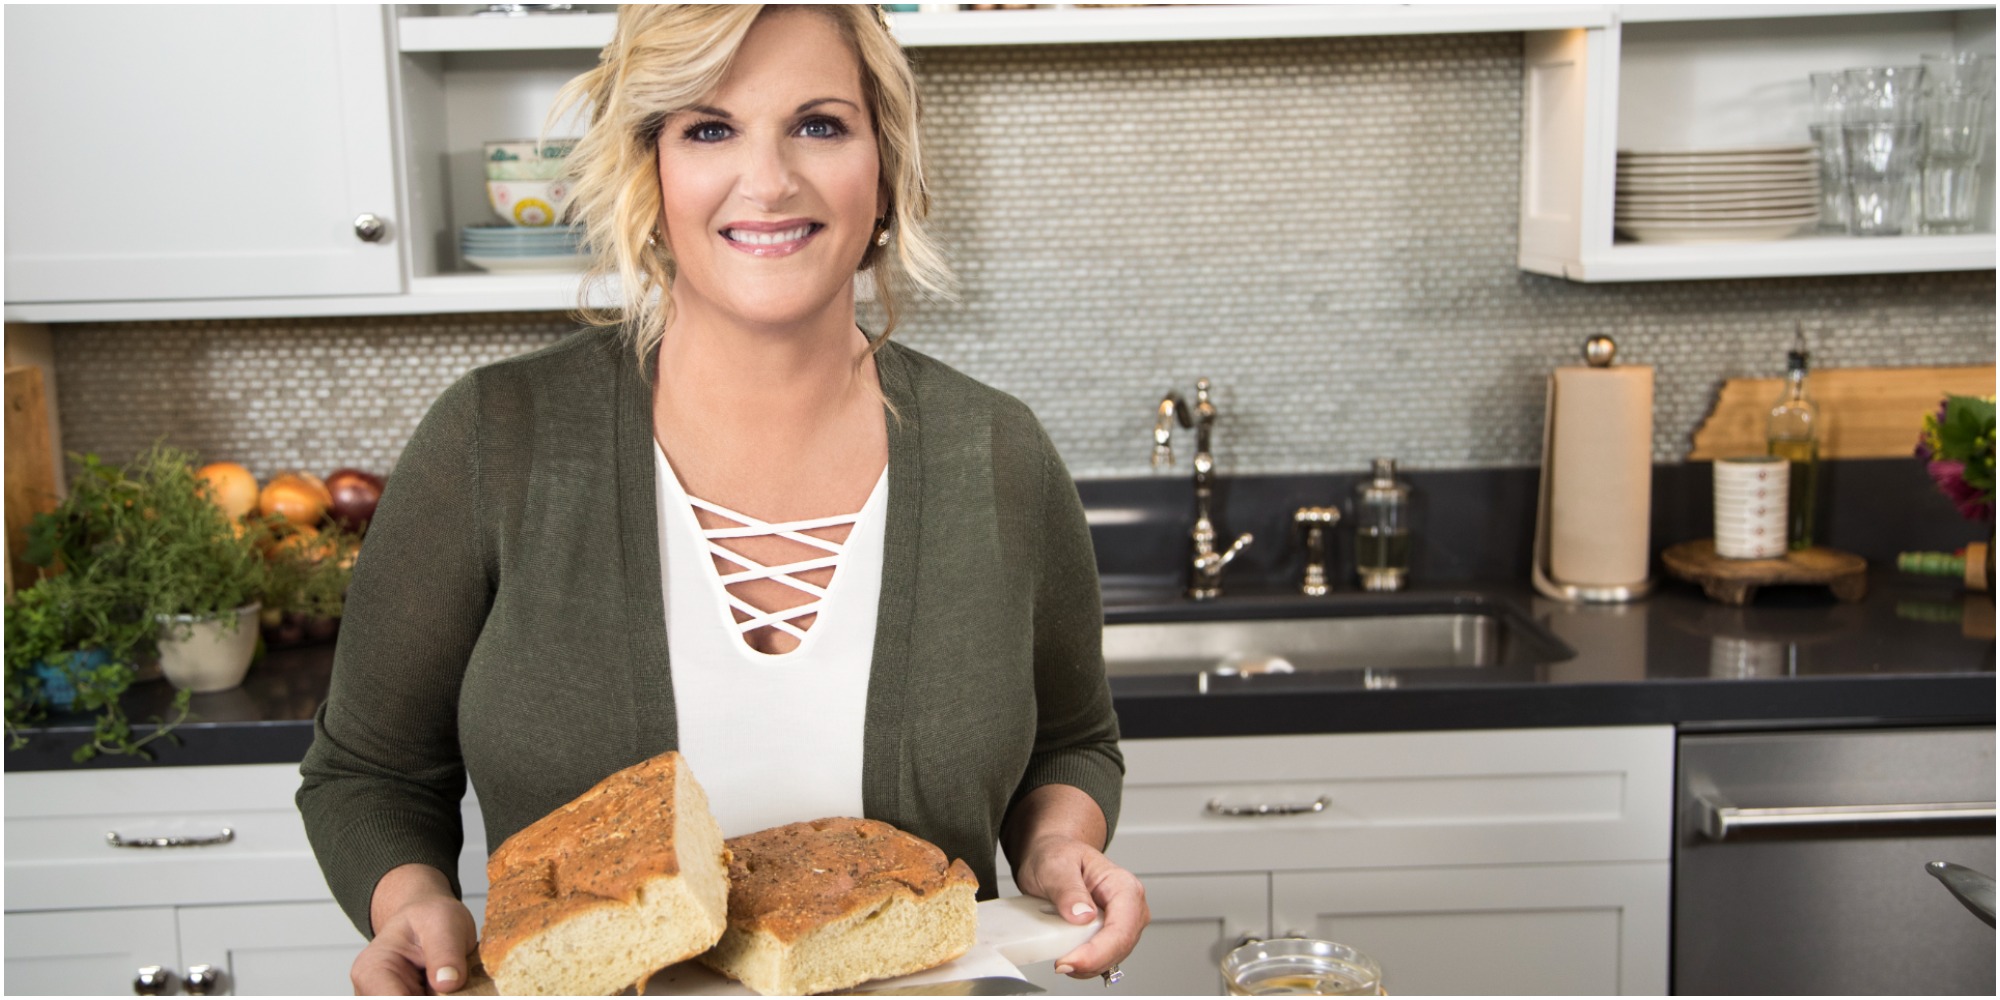 Trisha Yearwood smiles wearing a white shirt and green cardigan holding a plate of food